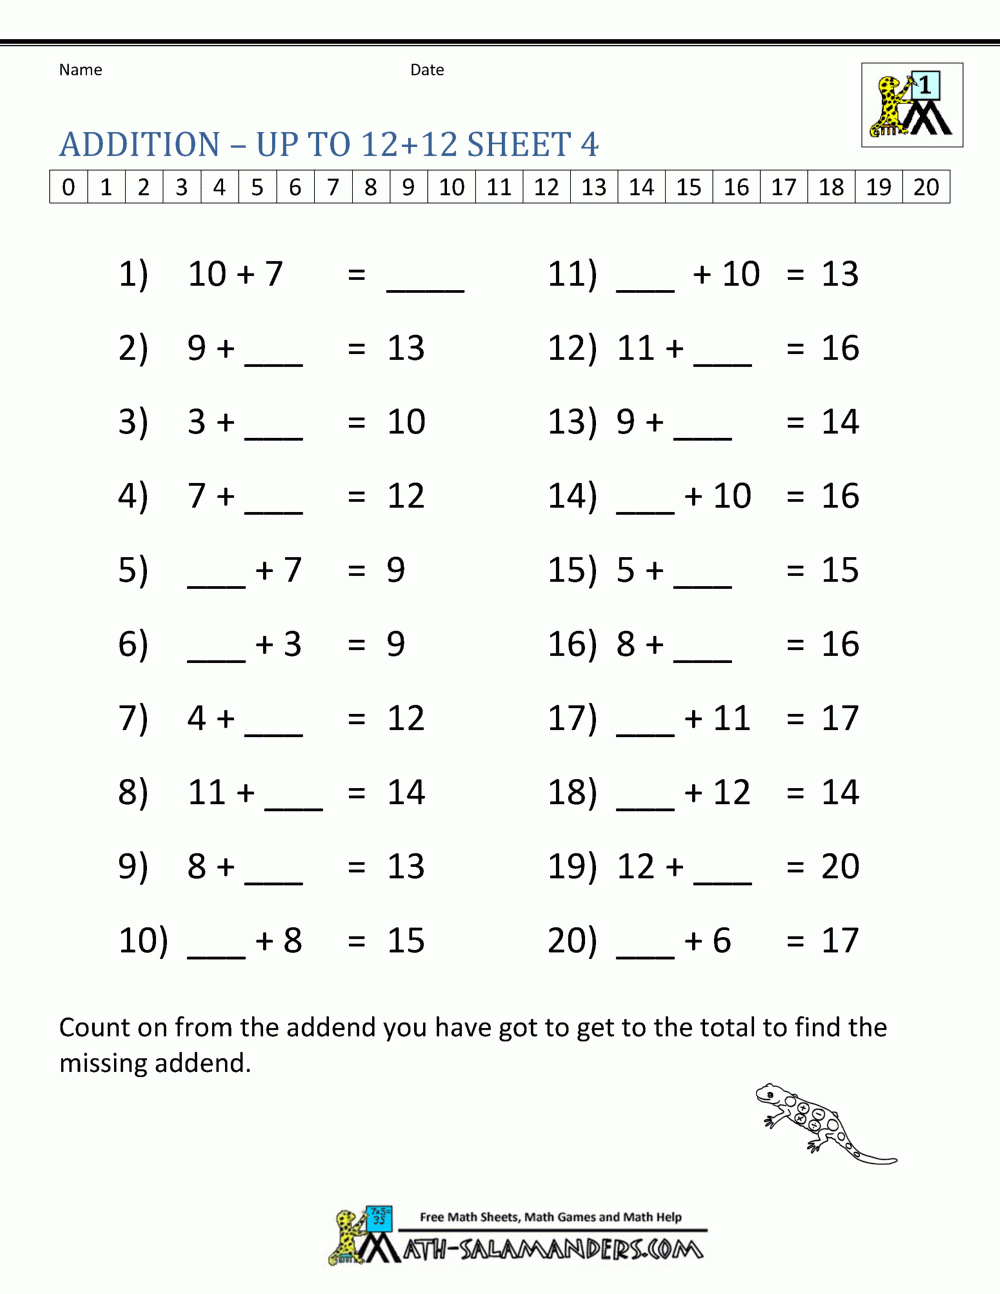 Learning Addition Facts Worksheets 1St Grade - Free Printable Worksheets For 1St Grade